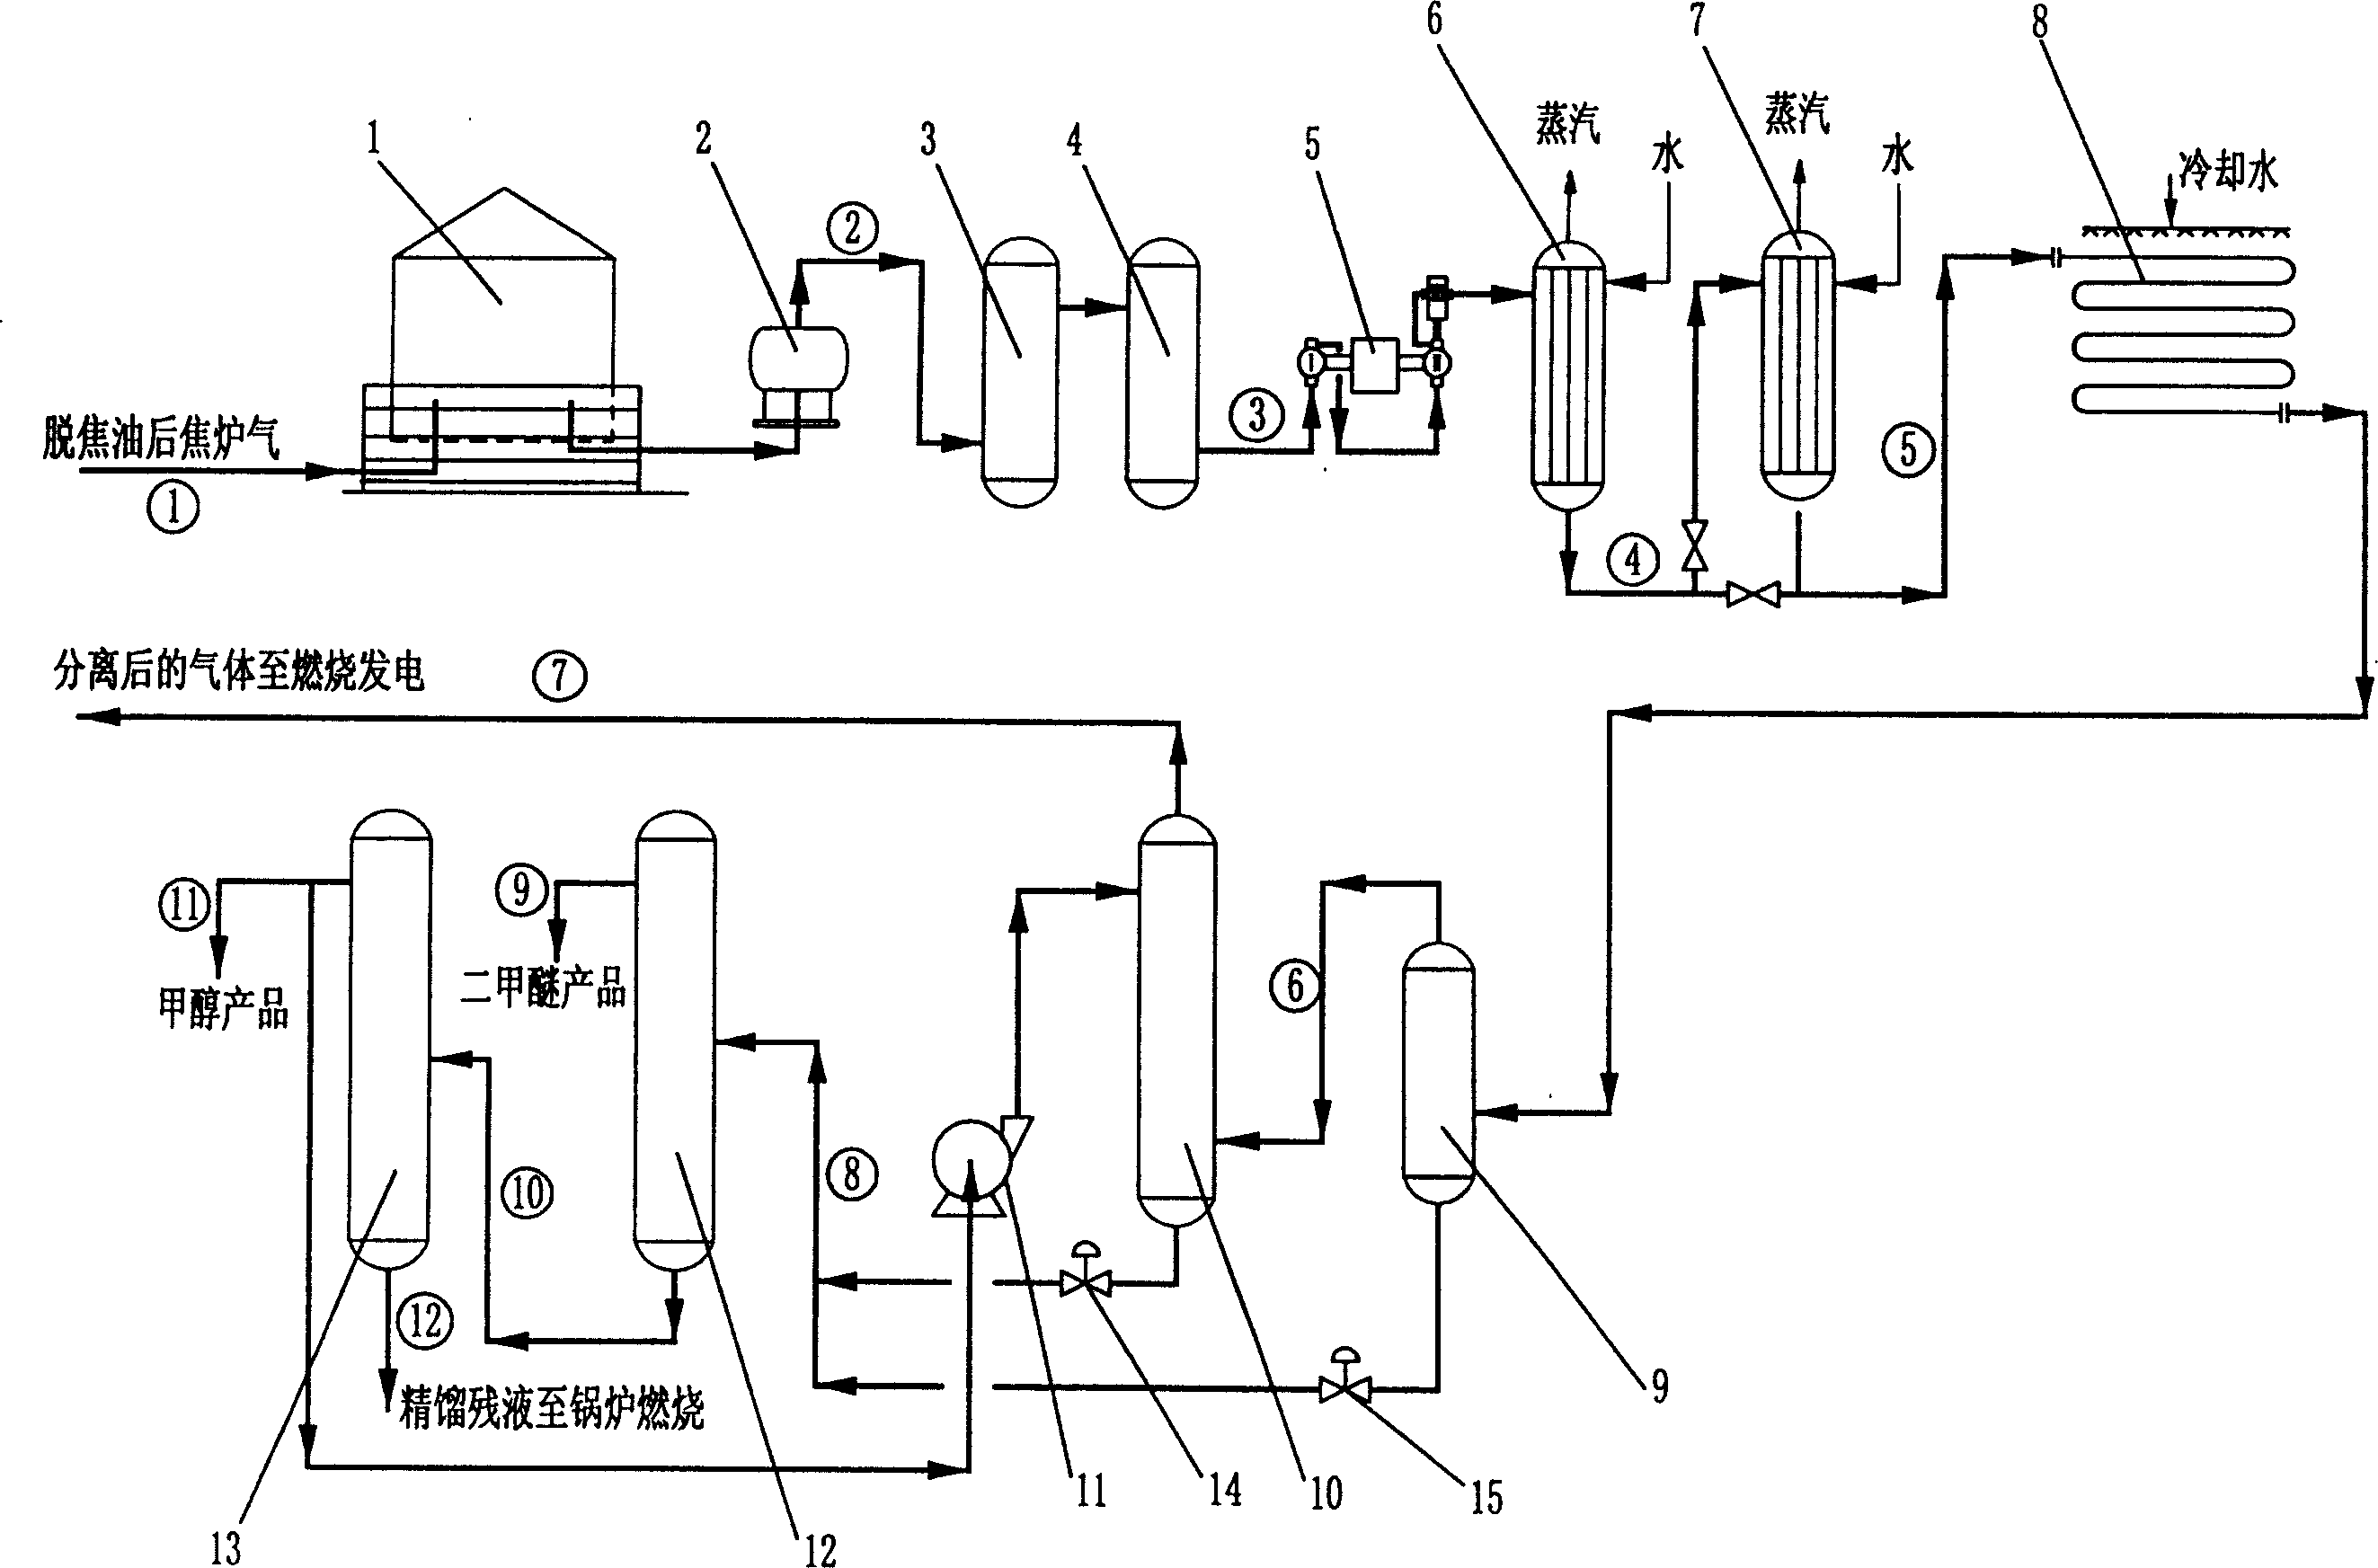 Production method of non-convertible combined methanol and dimethyl ether from coke oven gas